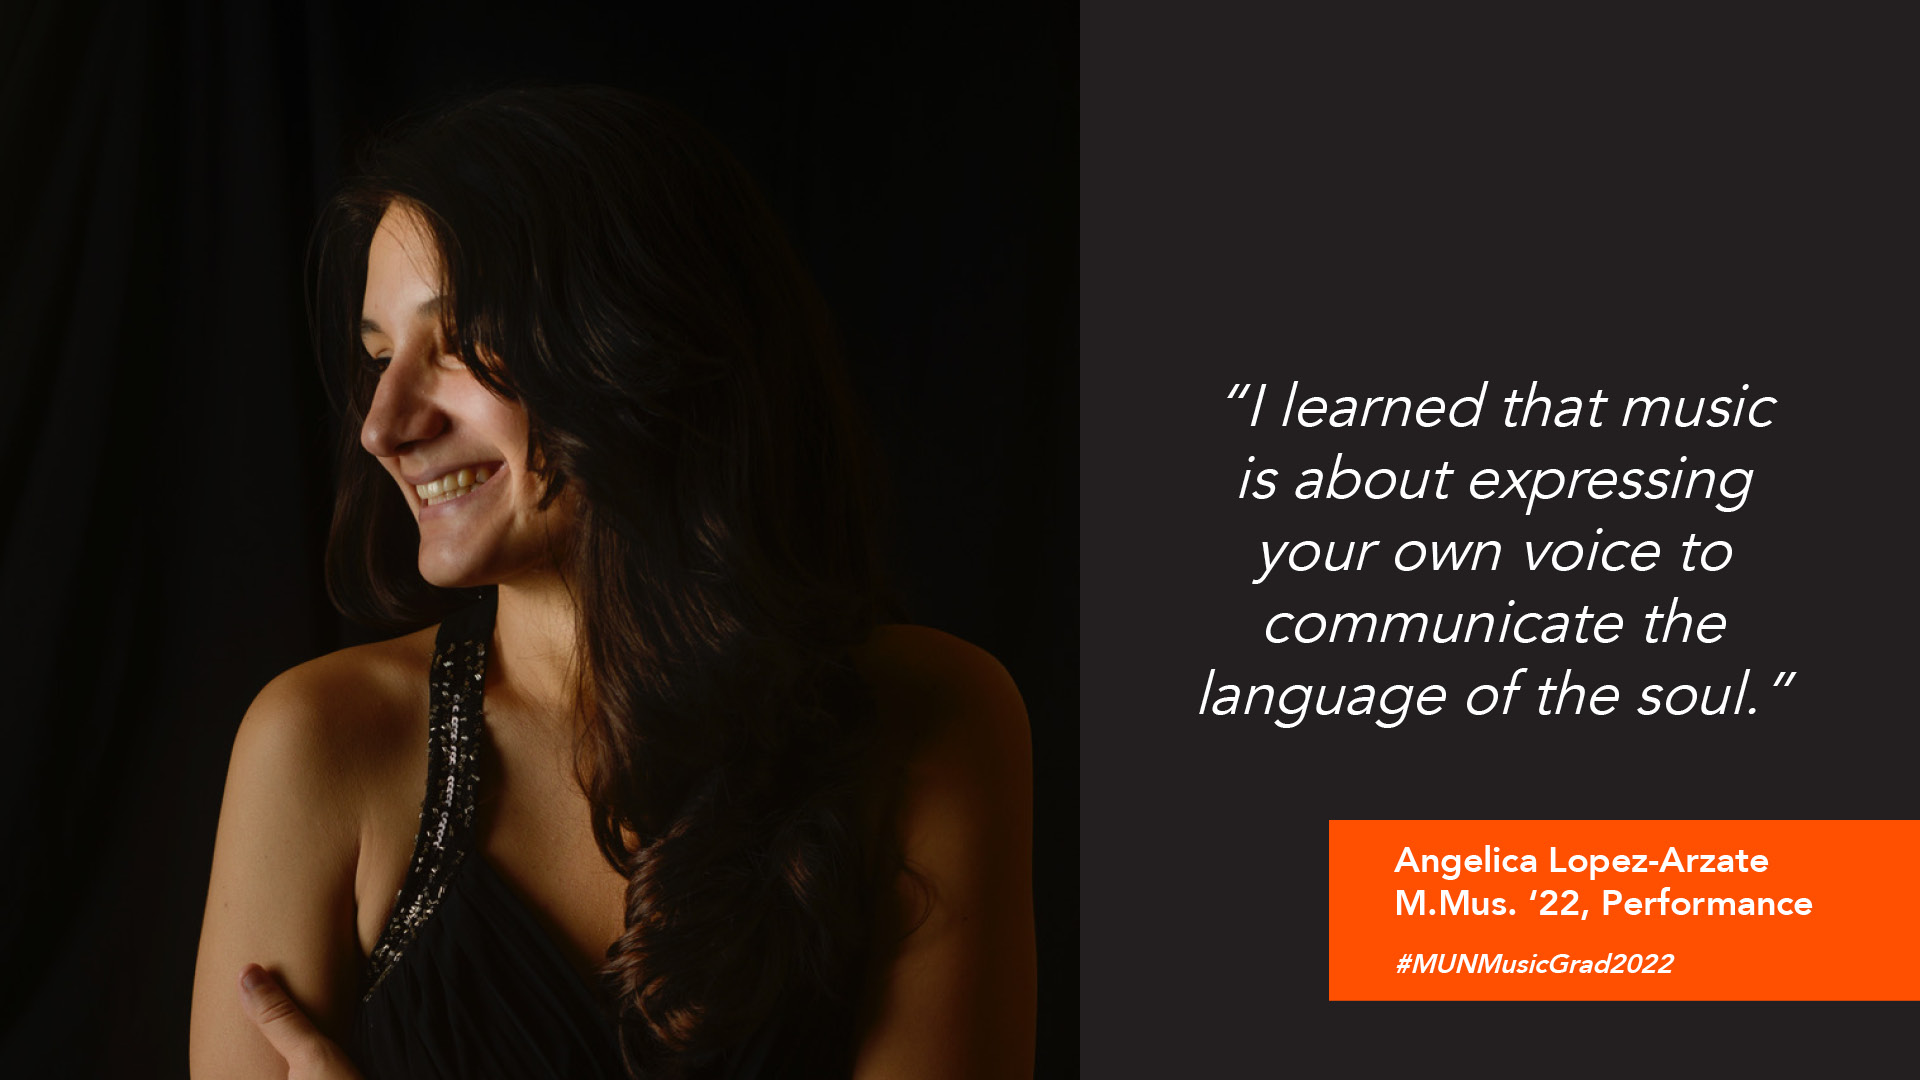 Angelica Lopez-Arzate with a quote